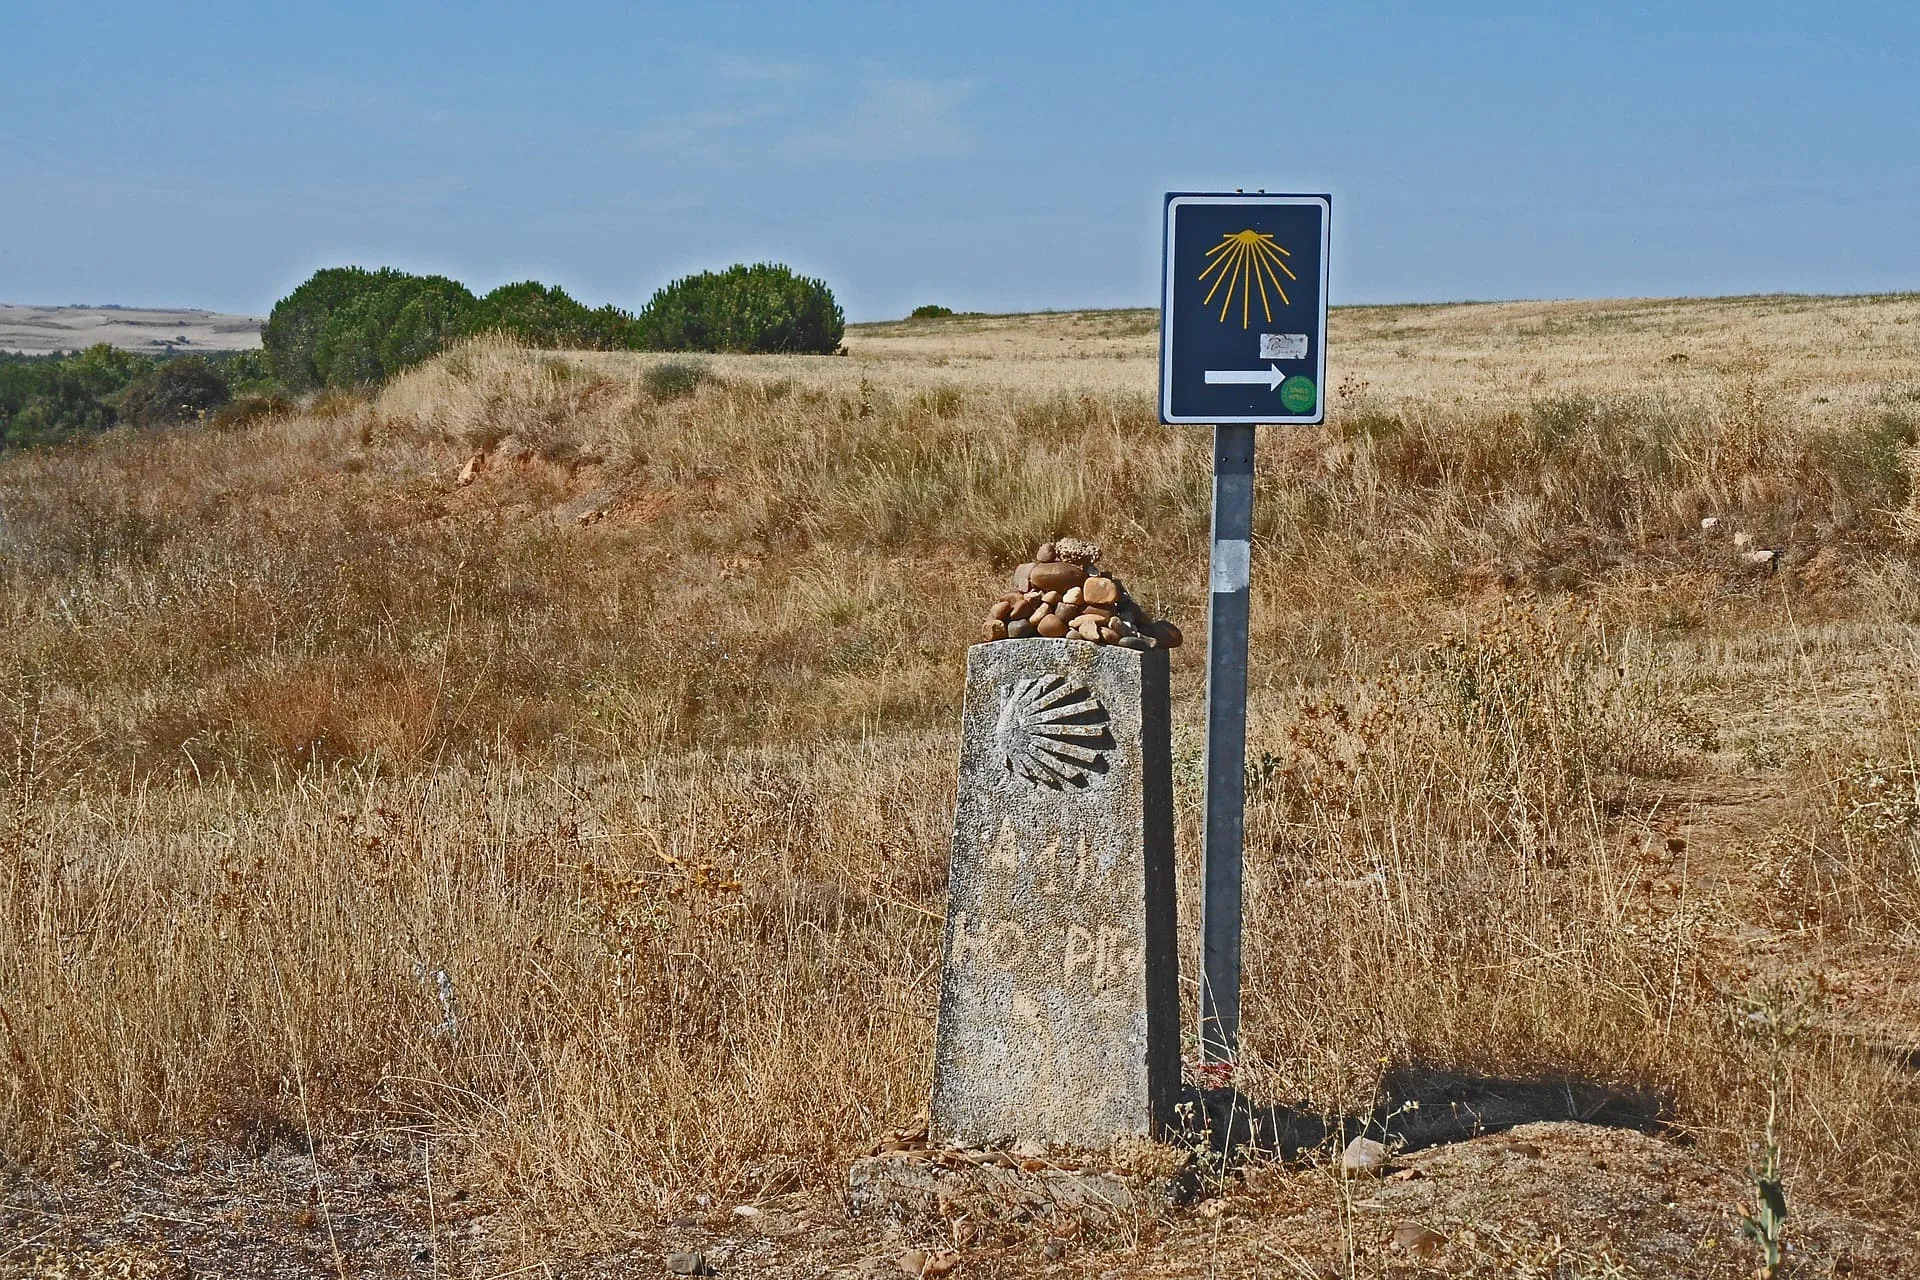 How Do I Find My Way on the Camino del Norte?